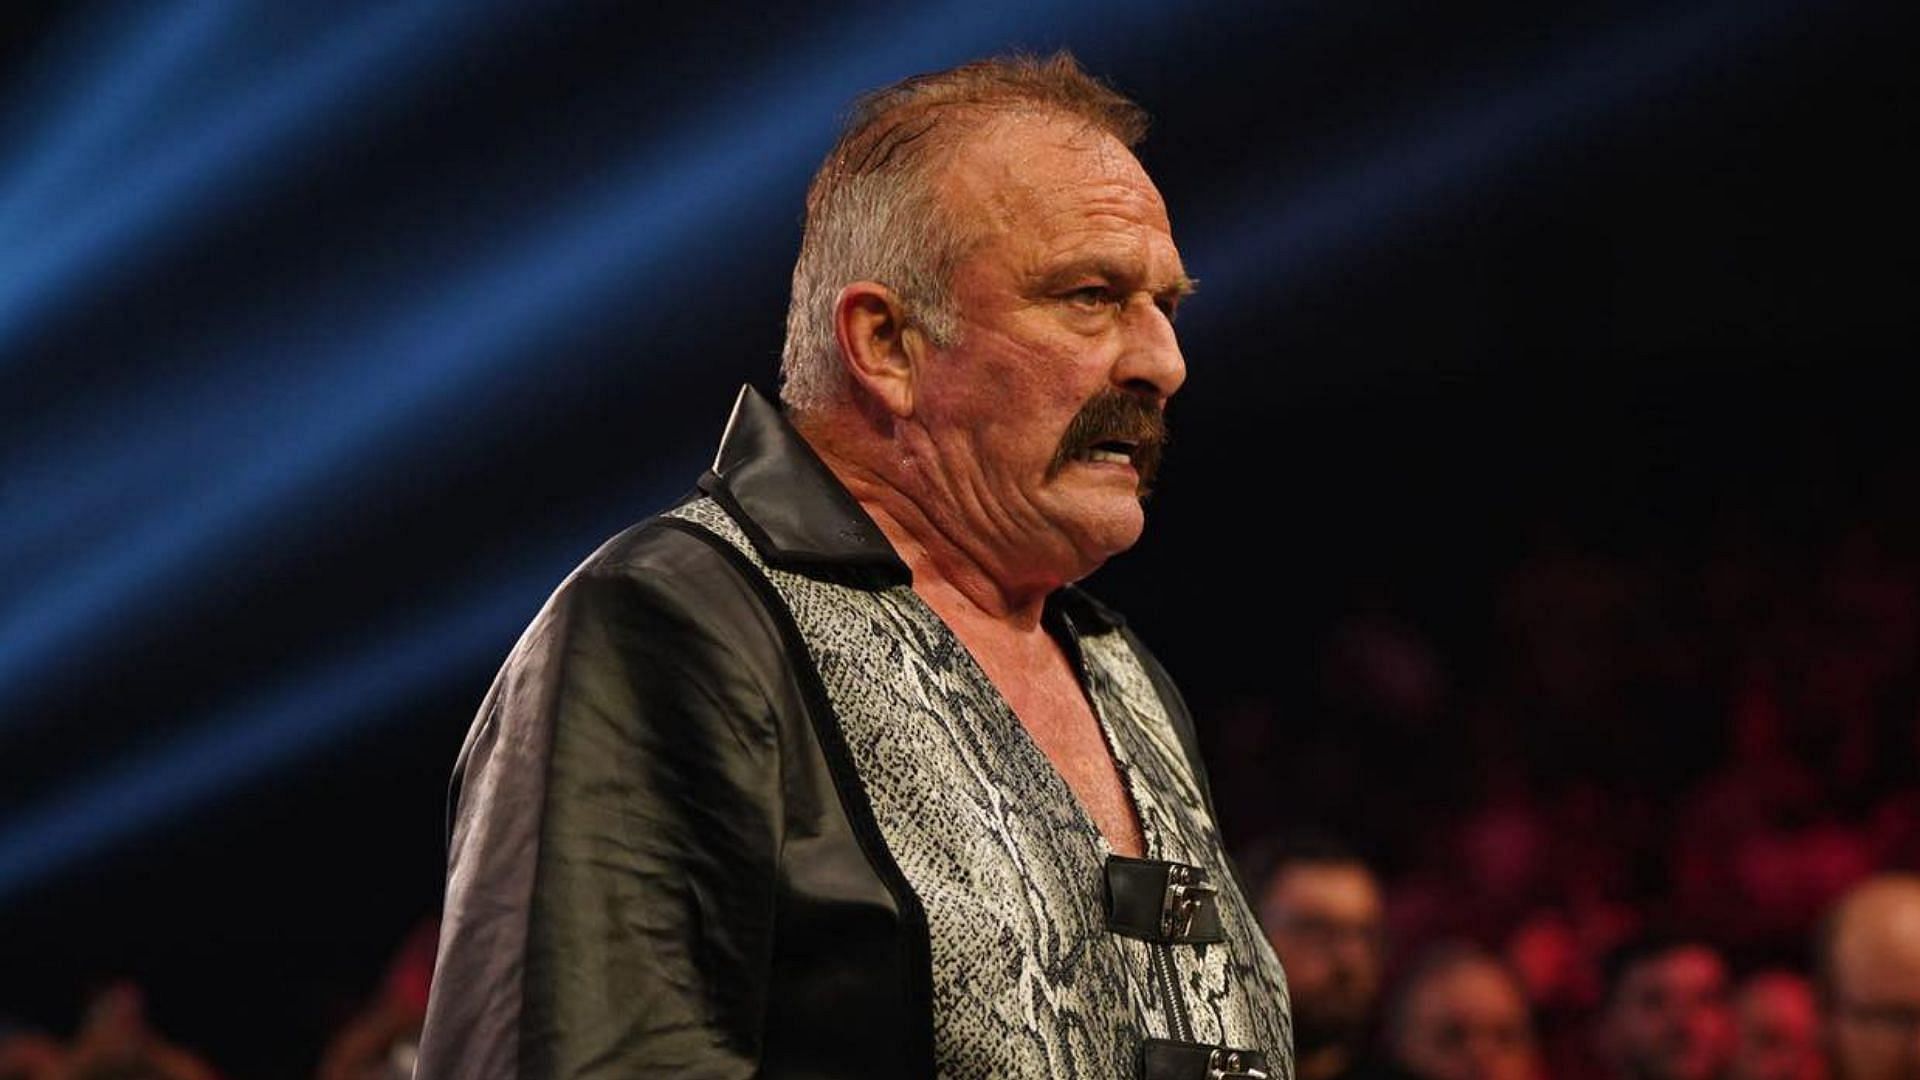 Jake Roberts recalls passing out in the ring